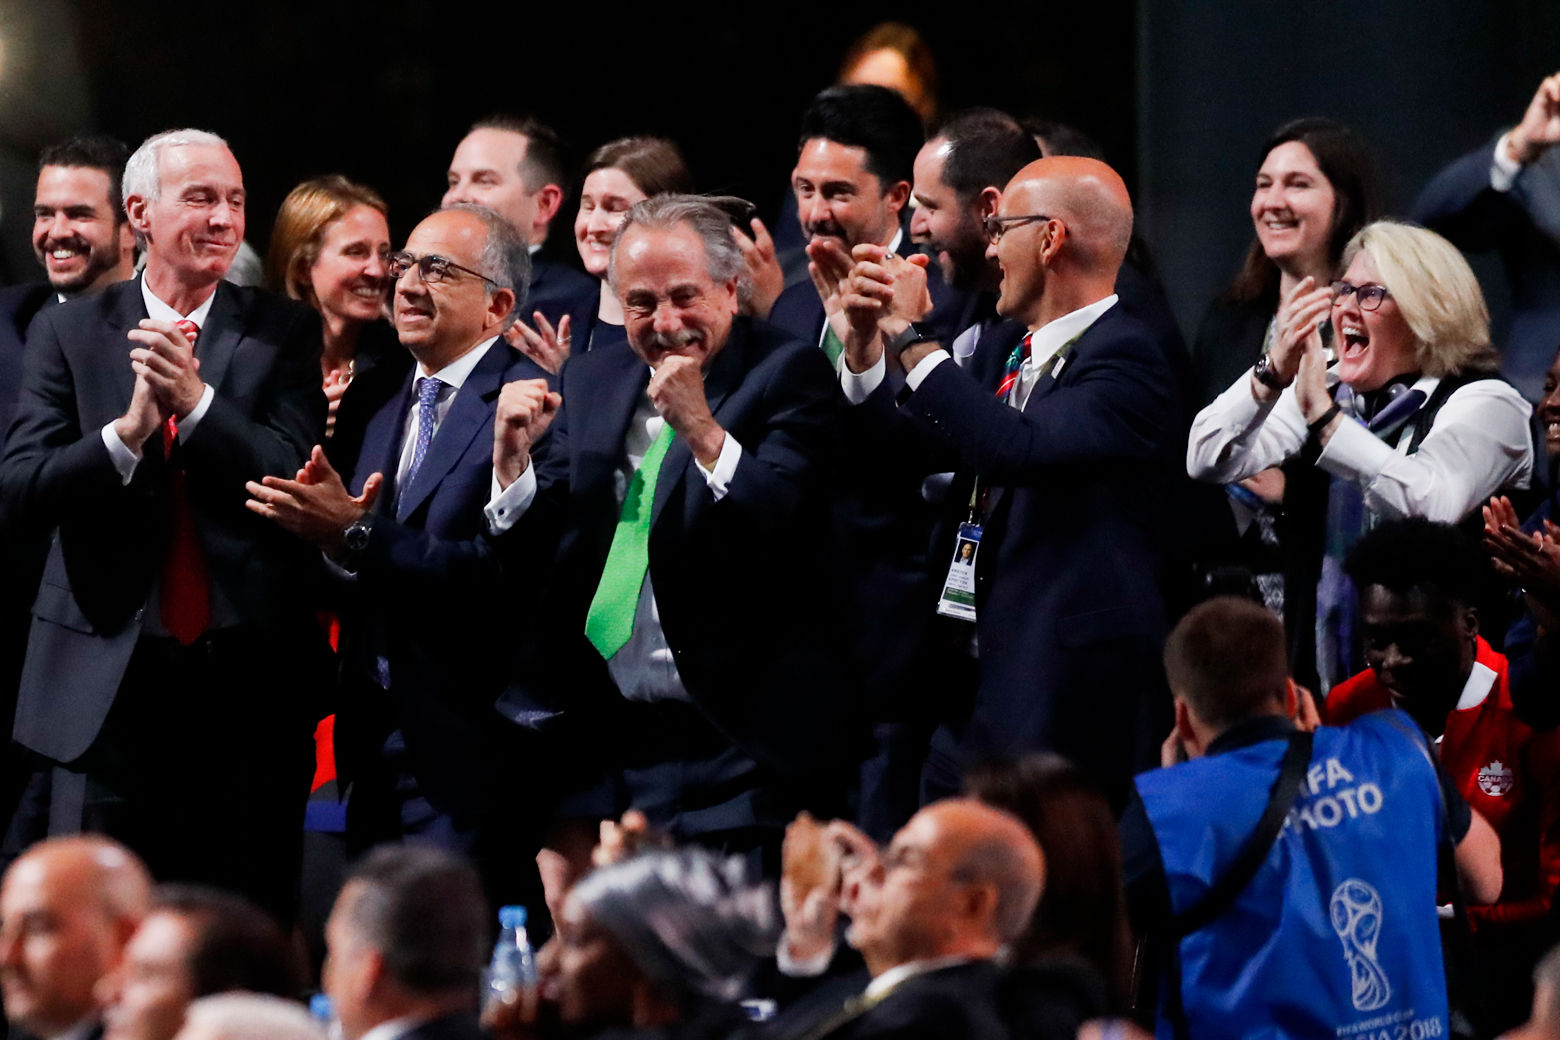 Delegates of Canada, Mexico and the United States celebrate after winning a joint bid to host the 2026 World Cup at the FIFA congress in Moscow, Russia, Wednesday, June 13, 2018. Standing on front row from left: Steve Reed, president of the Canadian Soccer Association, Carlos Cordeiro, U.S. soccer president and Decio de Maria, President of the Football Association of Mexico. (AP Photo/Pavel Golovkin)